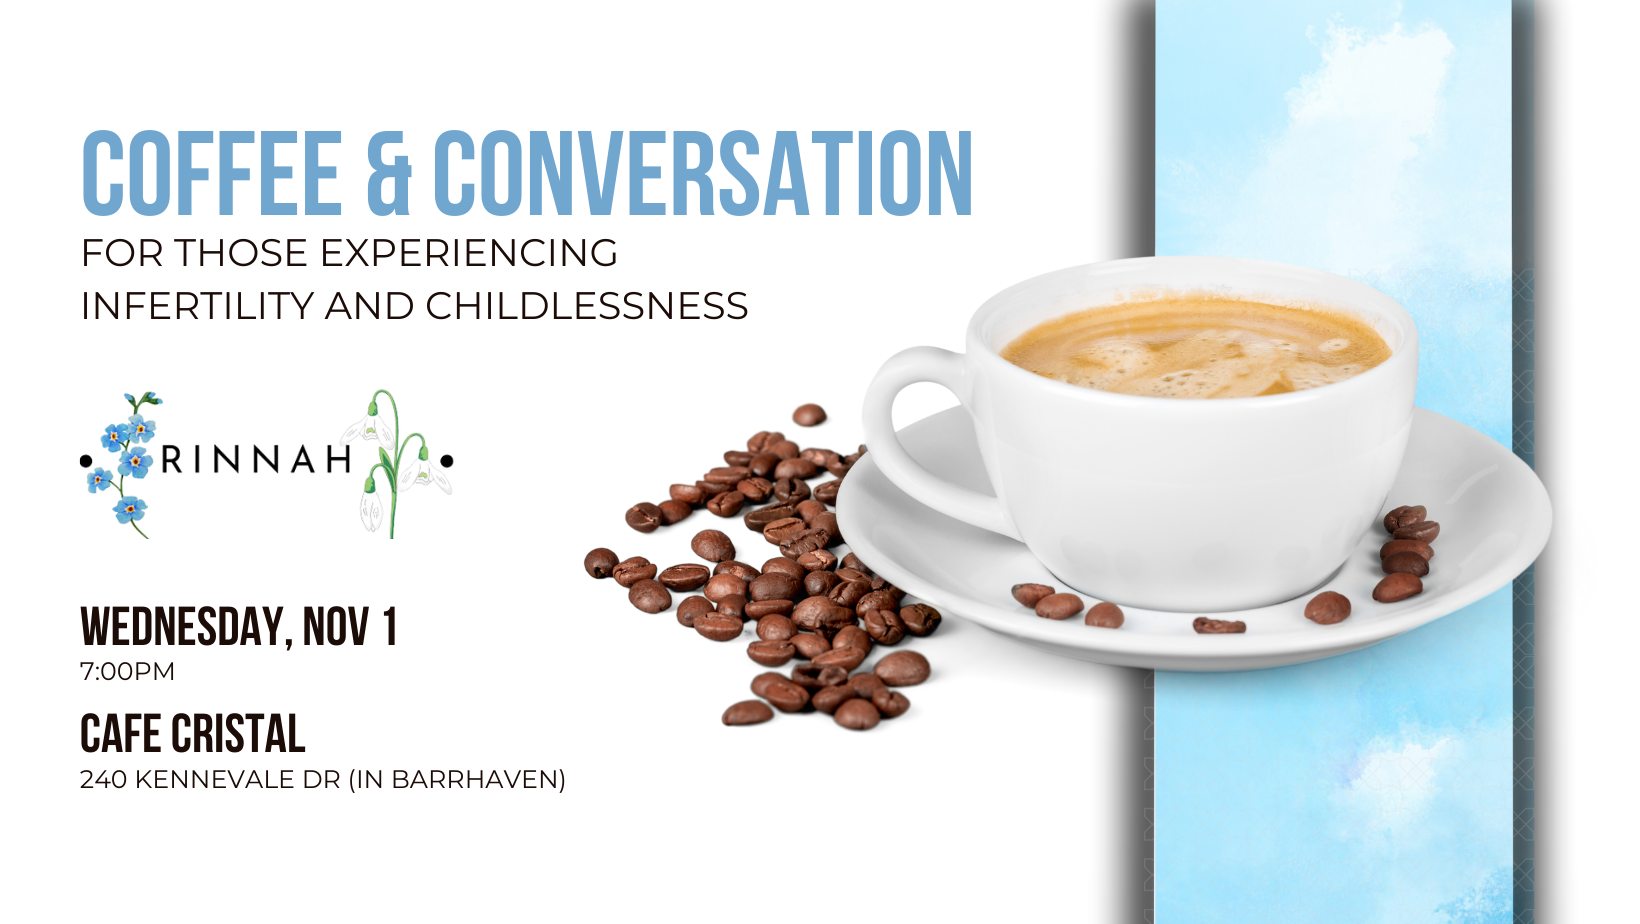 Wednesday Nov 1, Coffee and conversation for those experiencing infertility and childlessness